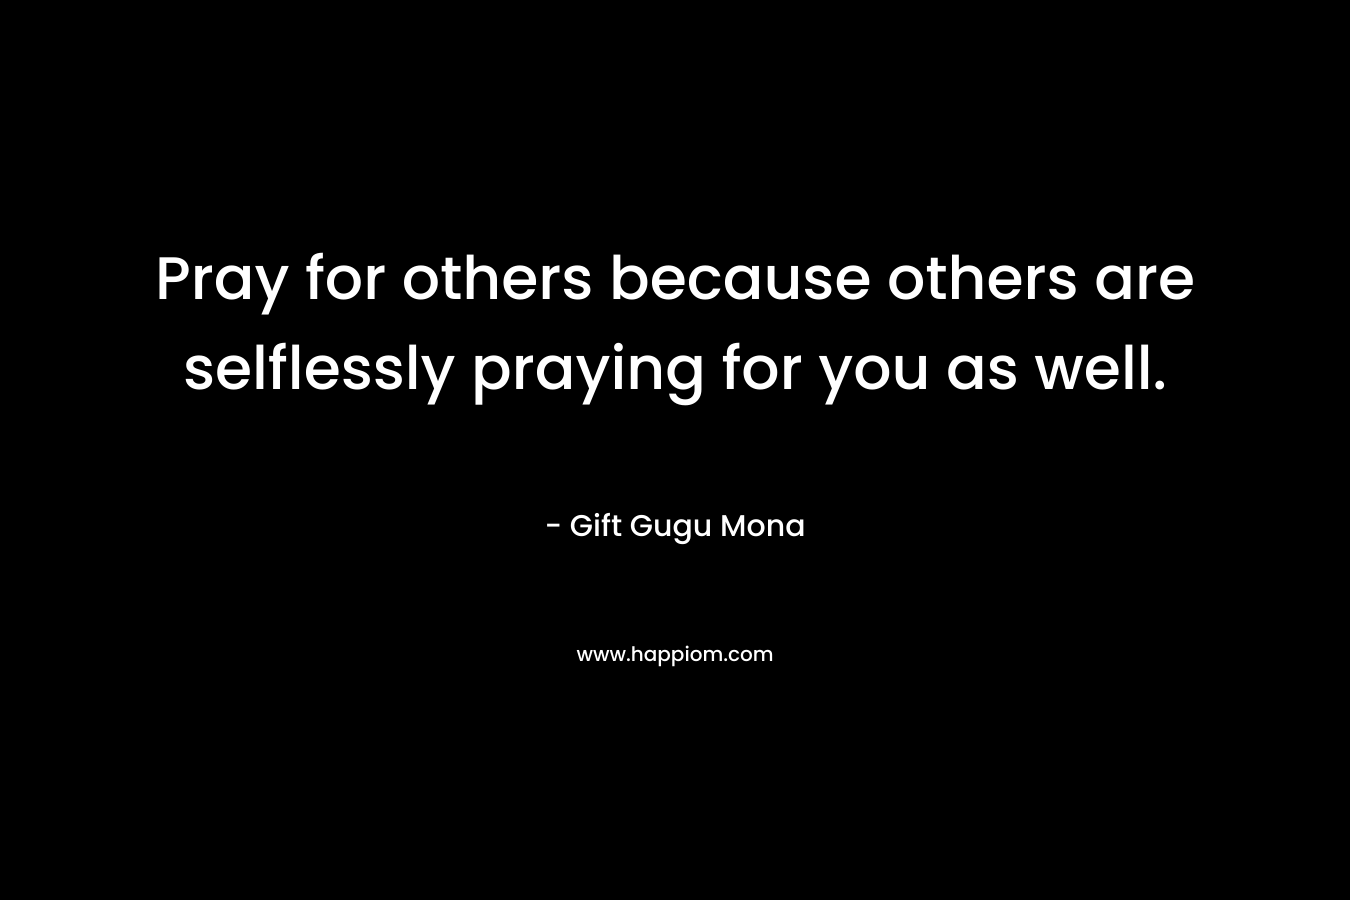 Pray for others because others are selflessly praying for you as well.